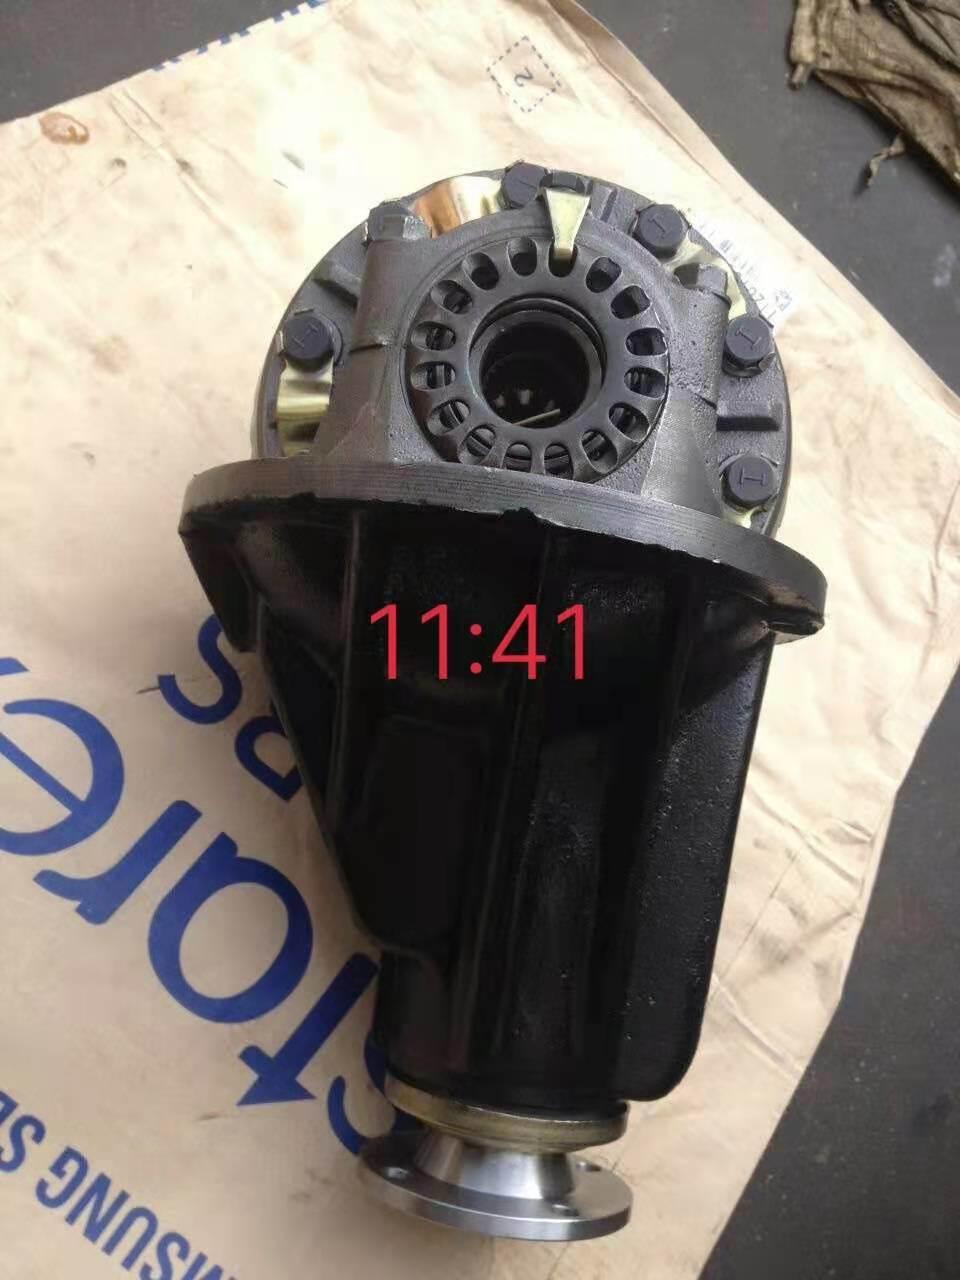 Differential for Toyota 22r Hiace Ratio 4.87 8: 39